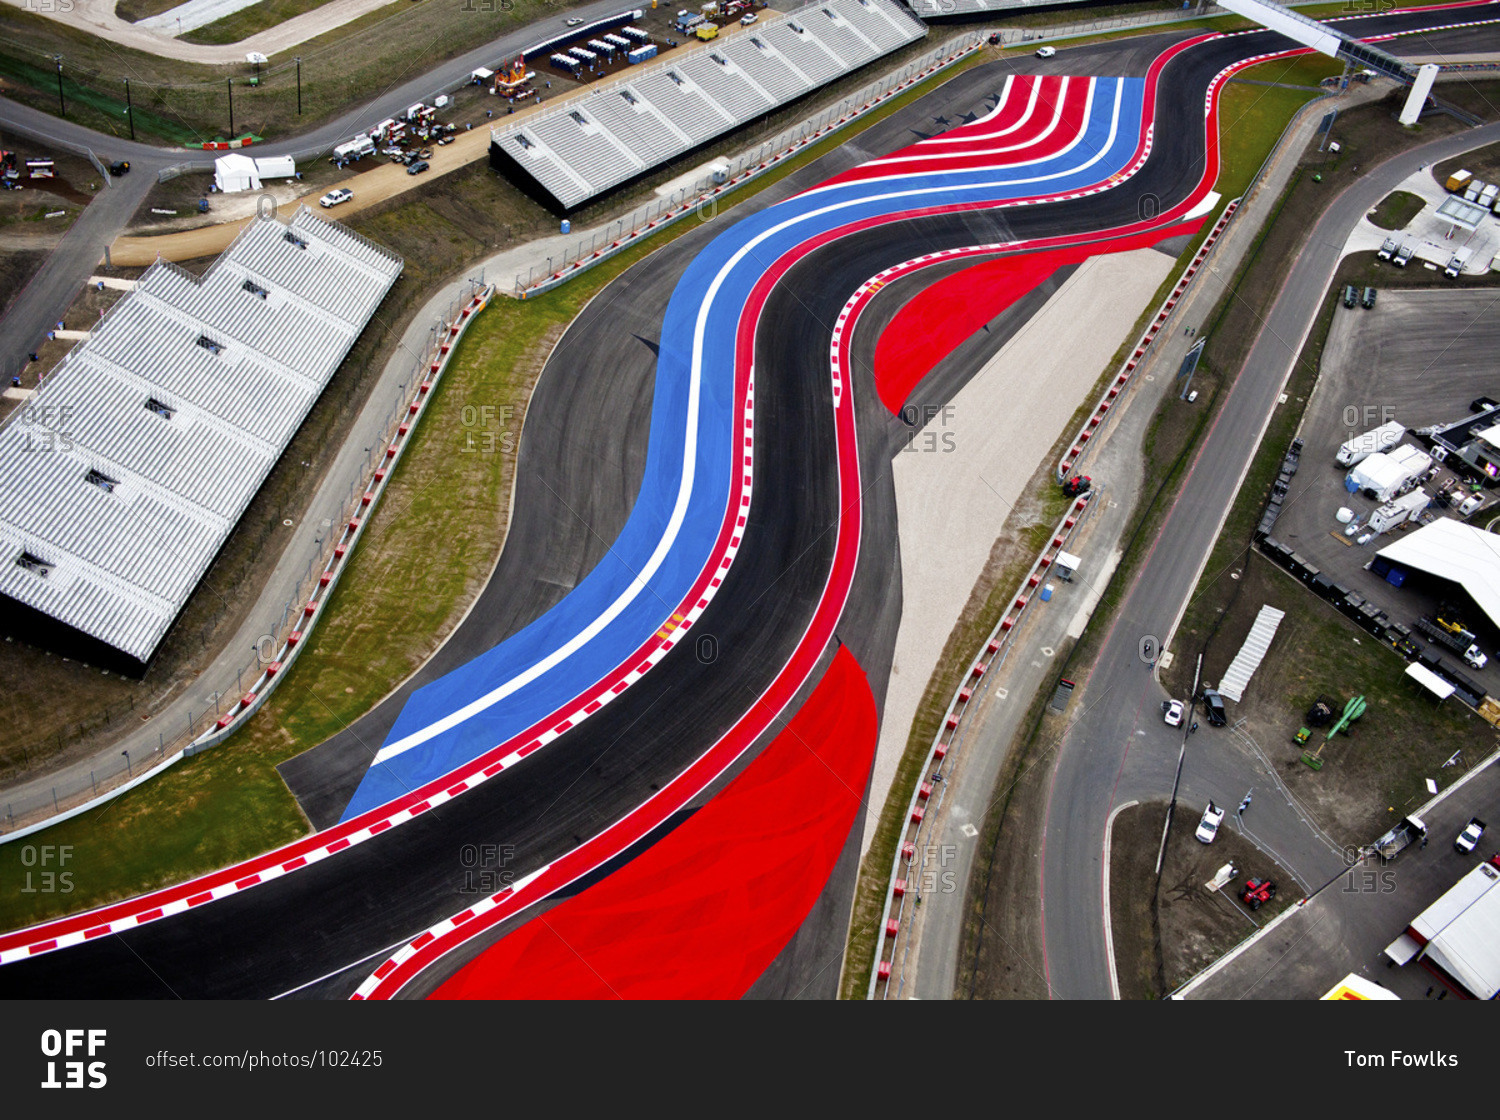 Austin, Texas November 15, 2012 Aerial view of Circuit of the